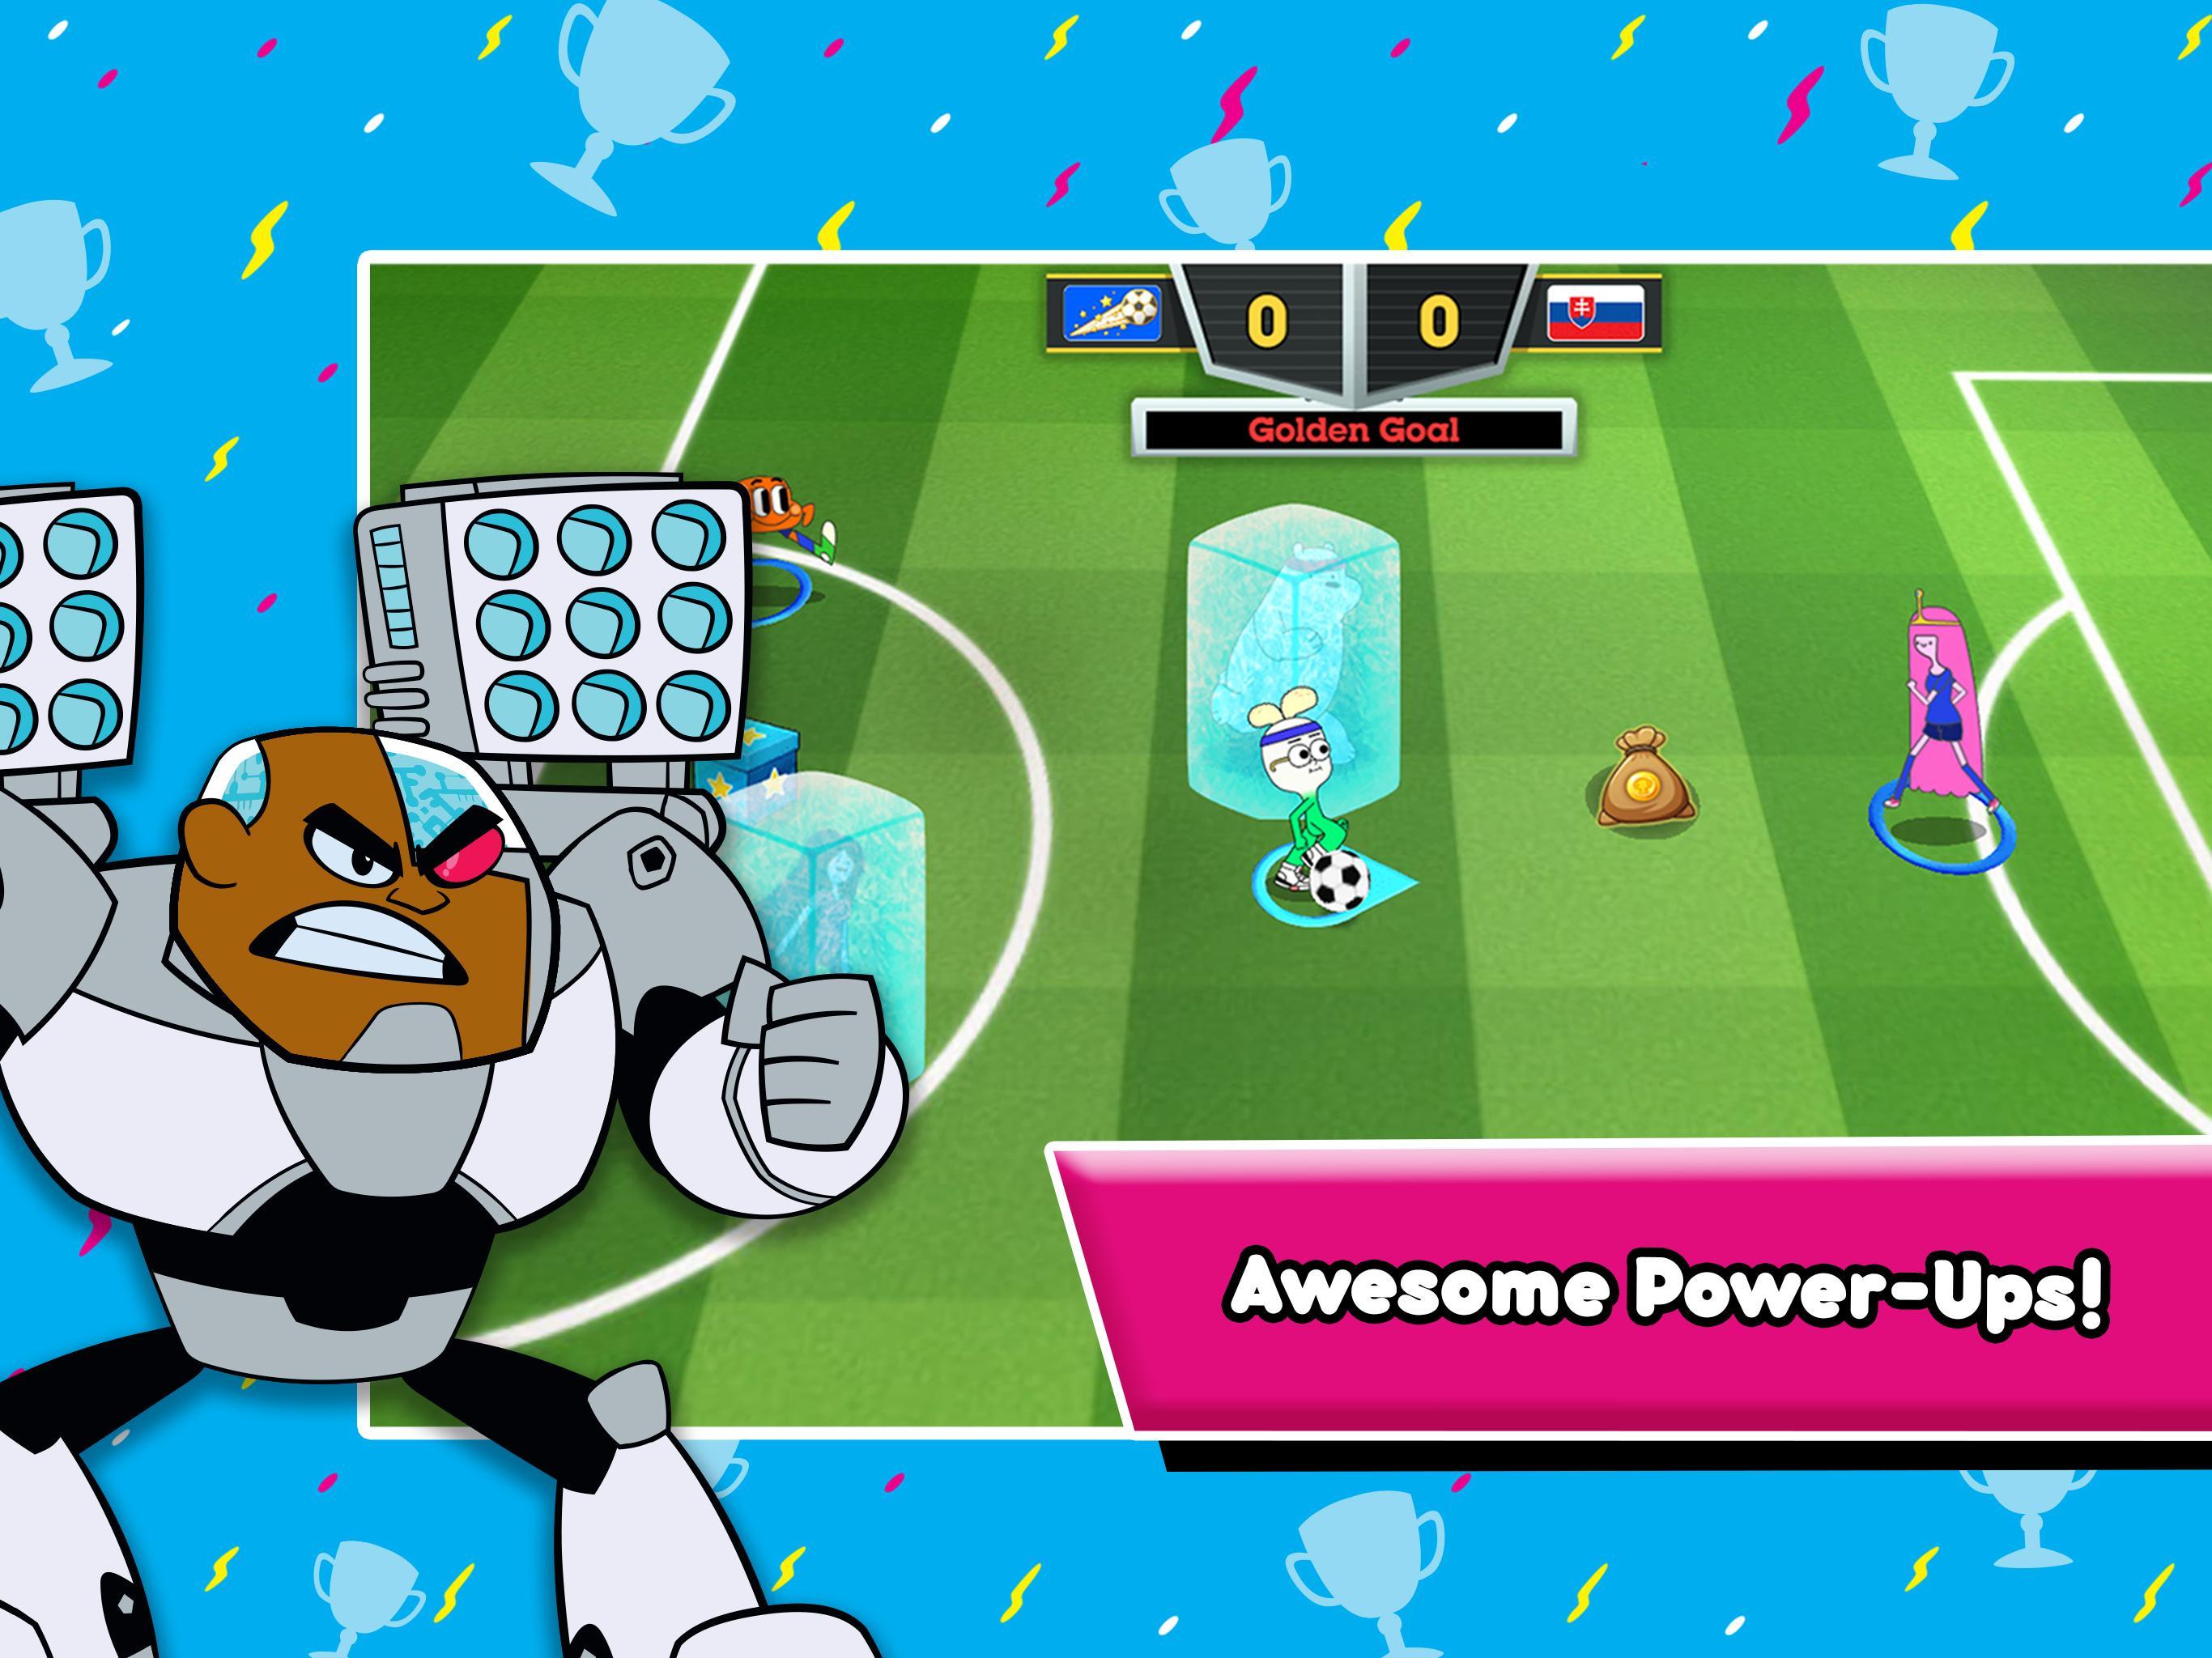 Toon Cup Cartoon Network S Soccer Game For Android Apk.